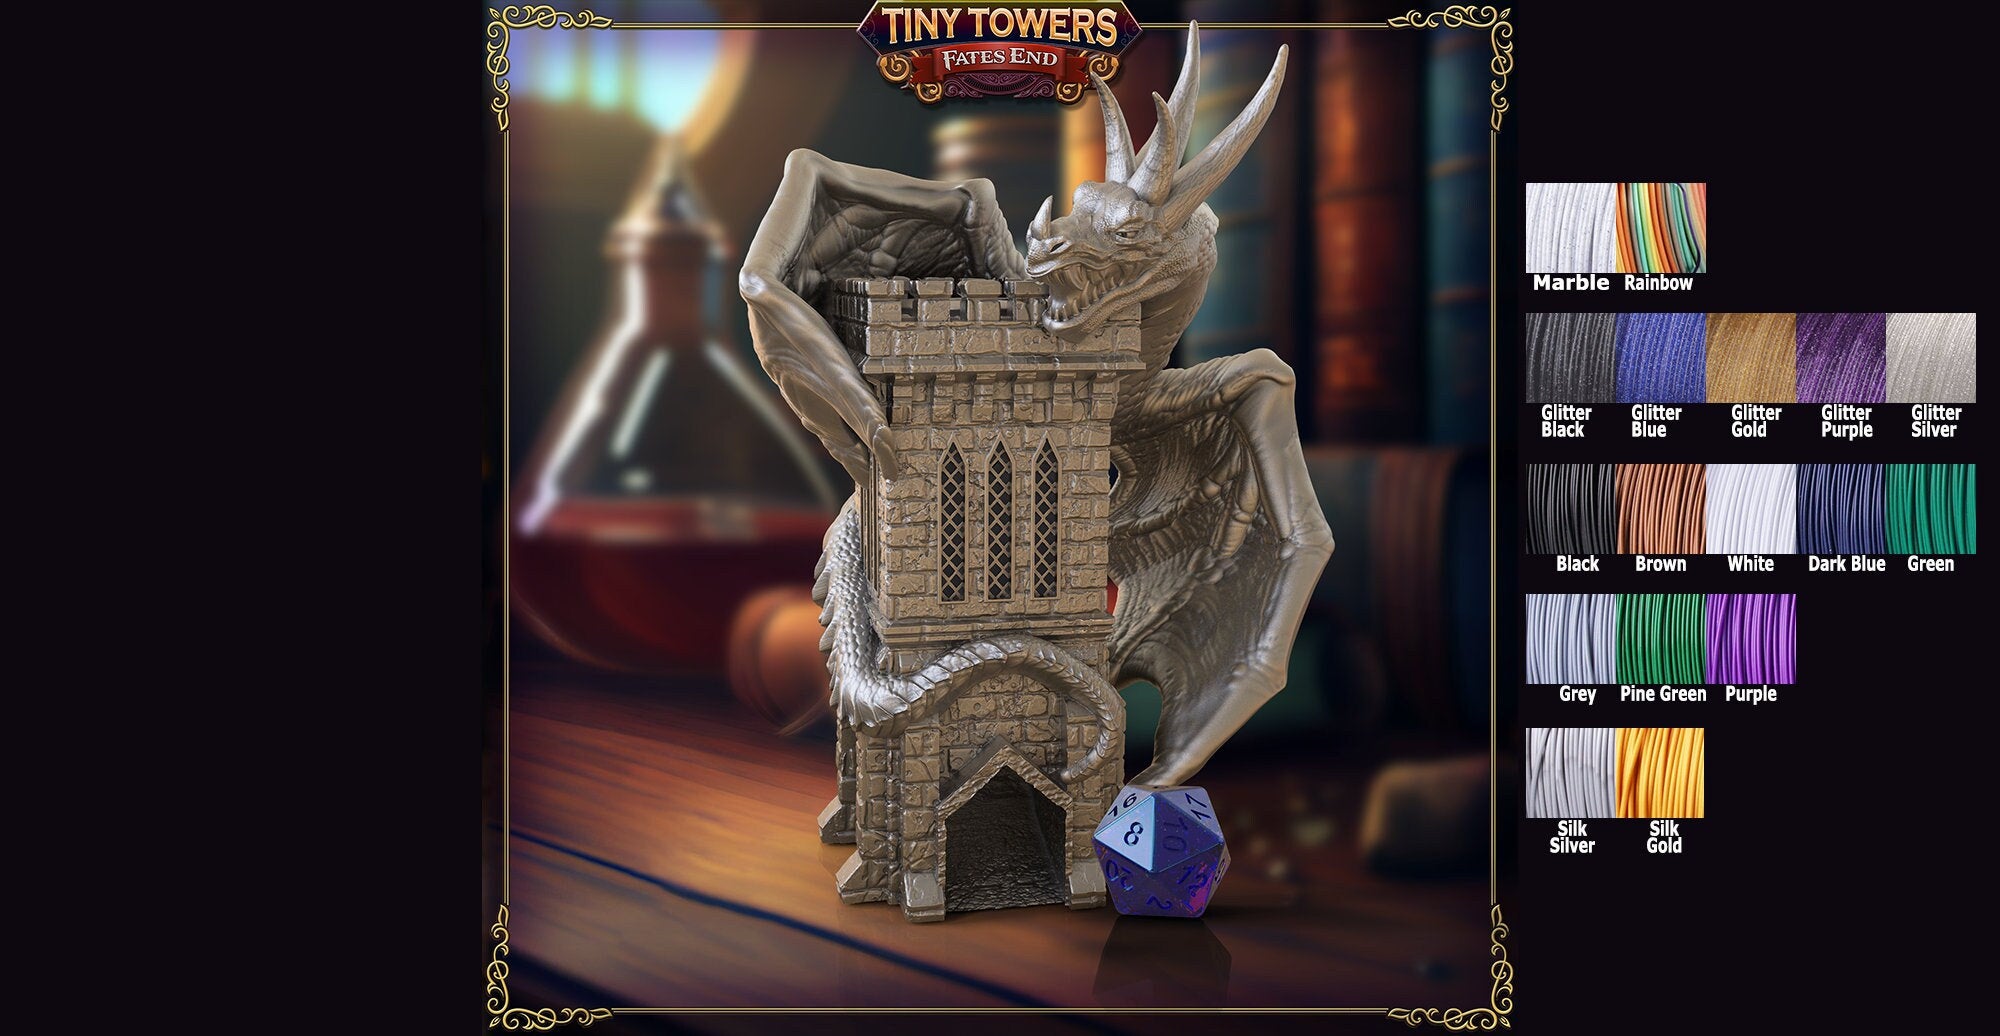 Tiny Dice Tower "Wyvern" | Dungeons & Dragons | Gaming Accessoires | Tabletop | DnD | RPG | Fantasy | ttrpg | Roleplaying | Wargaming-Role Playing Games